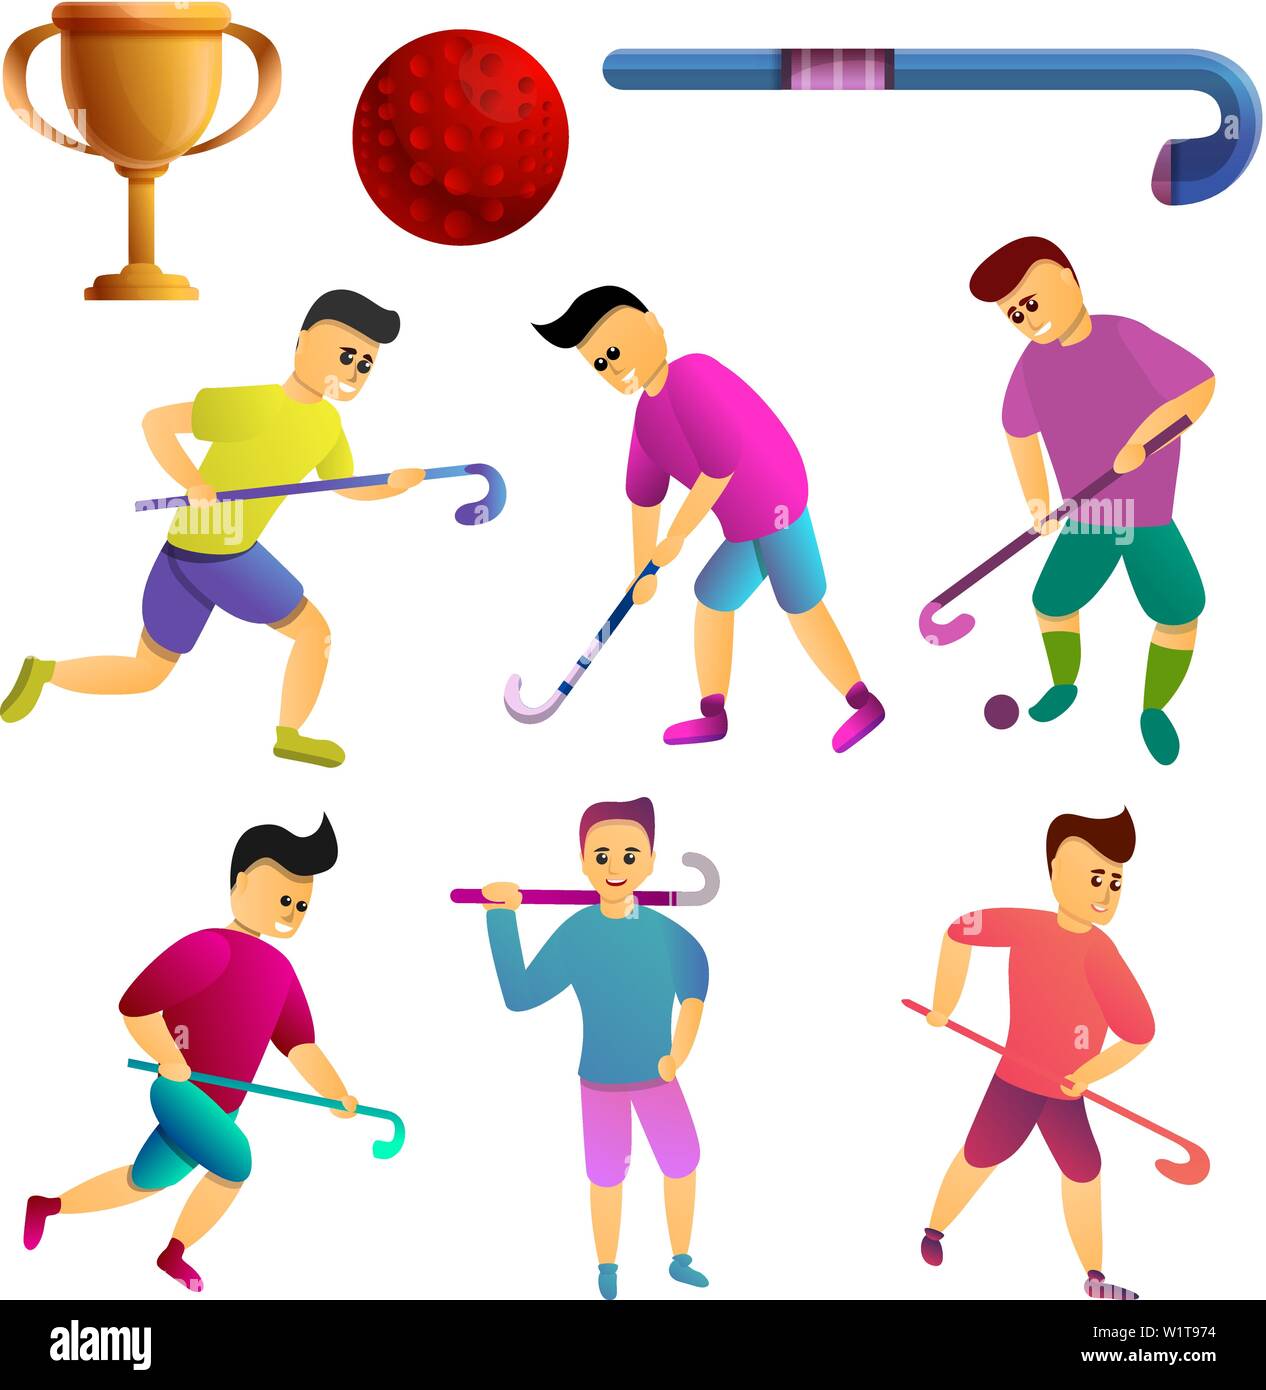 754 Field Hockey Kids Images, Stock Photos, 3D objects, & Vectors